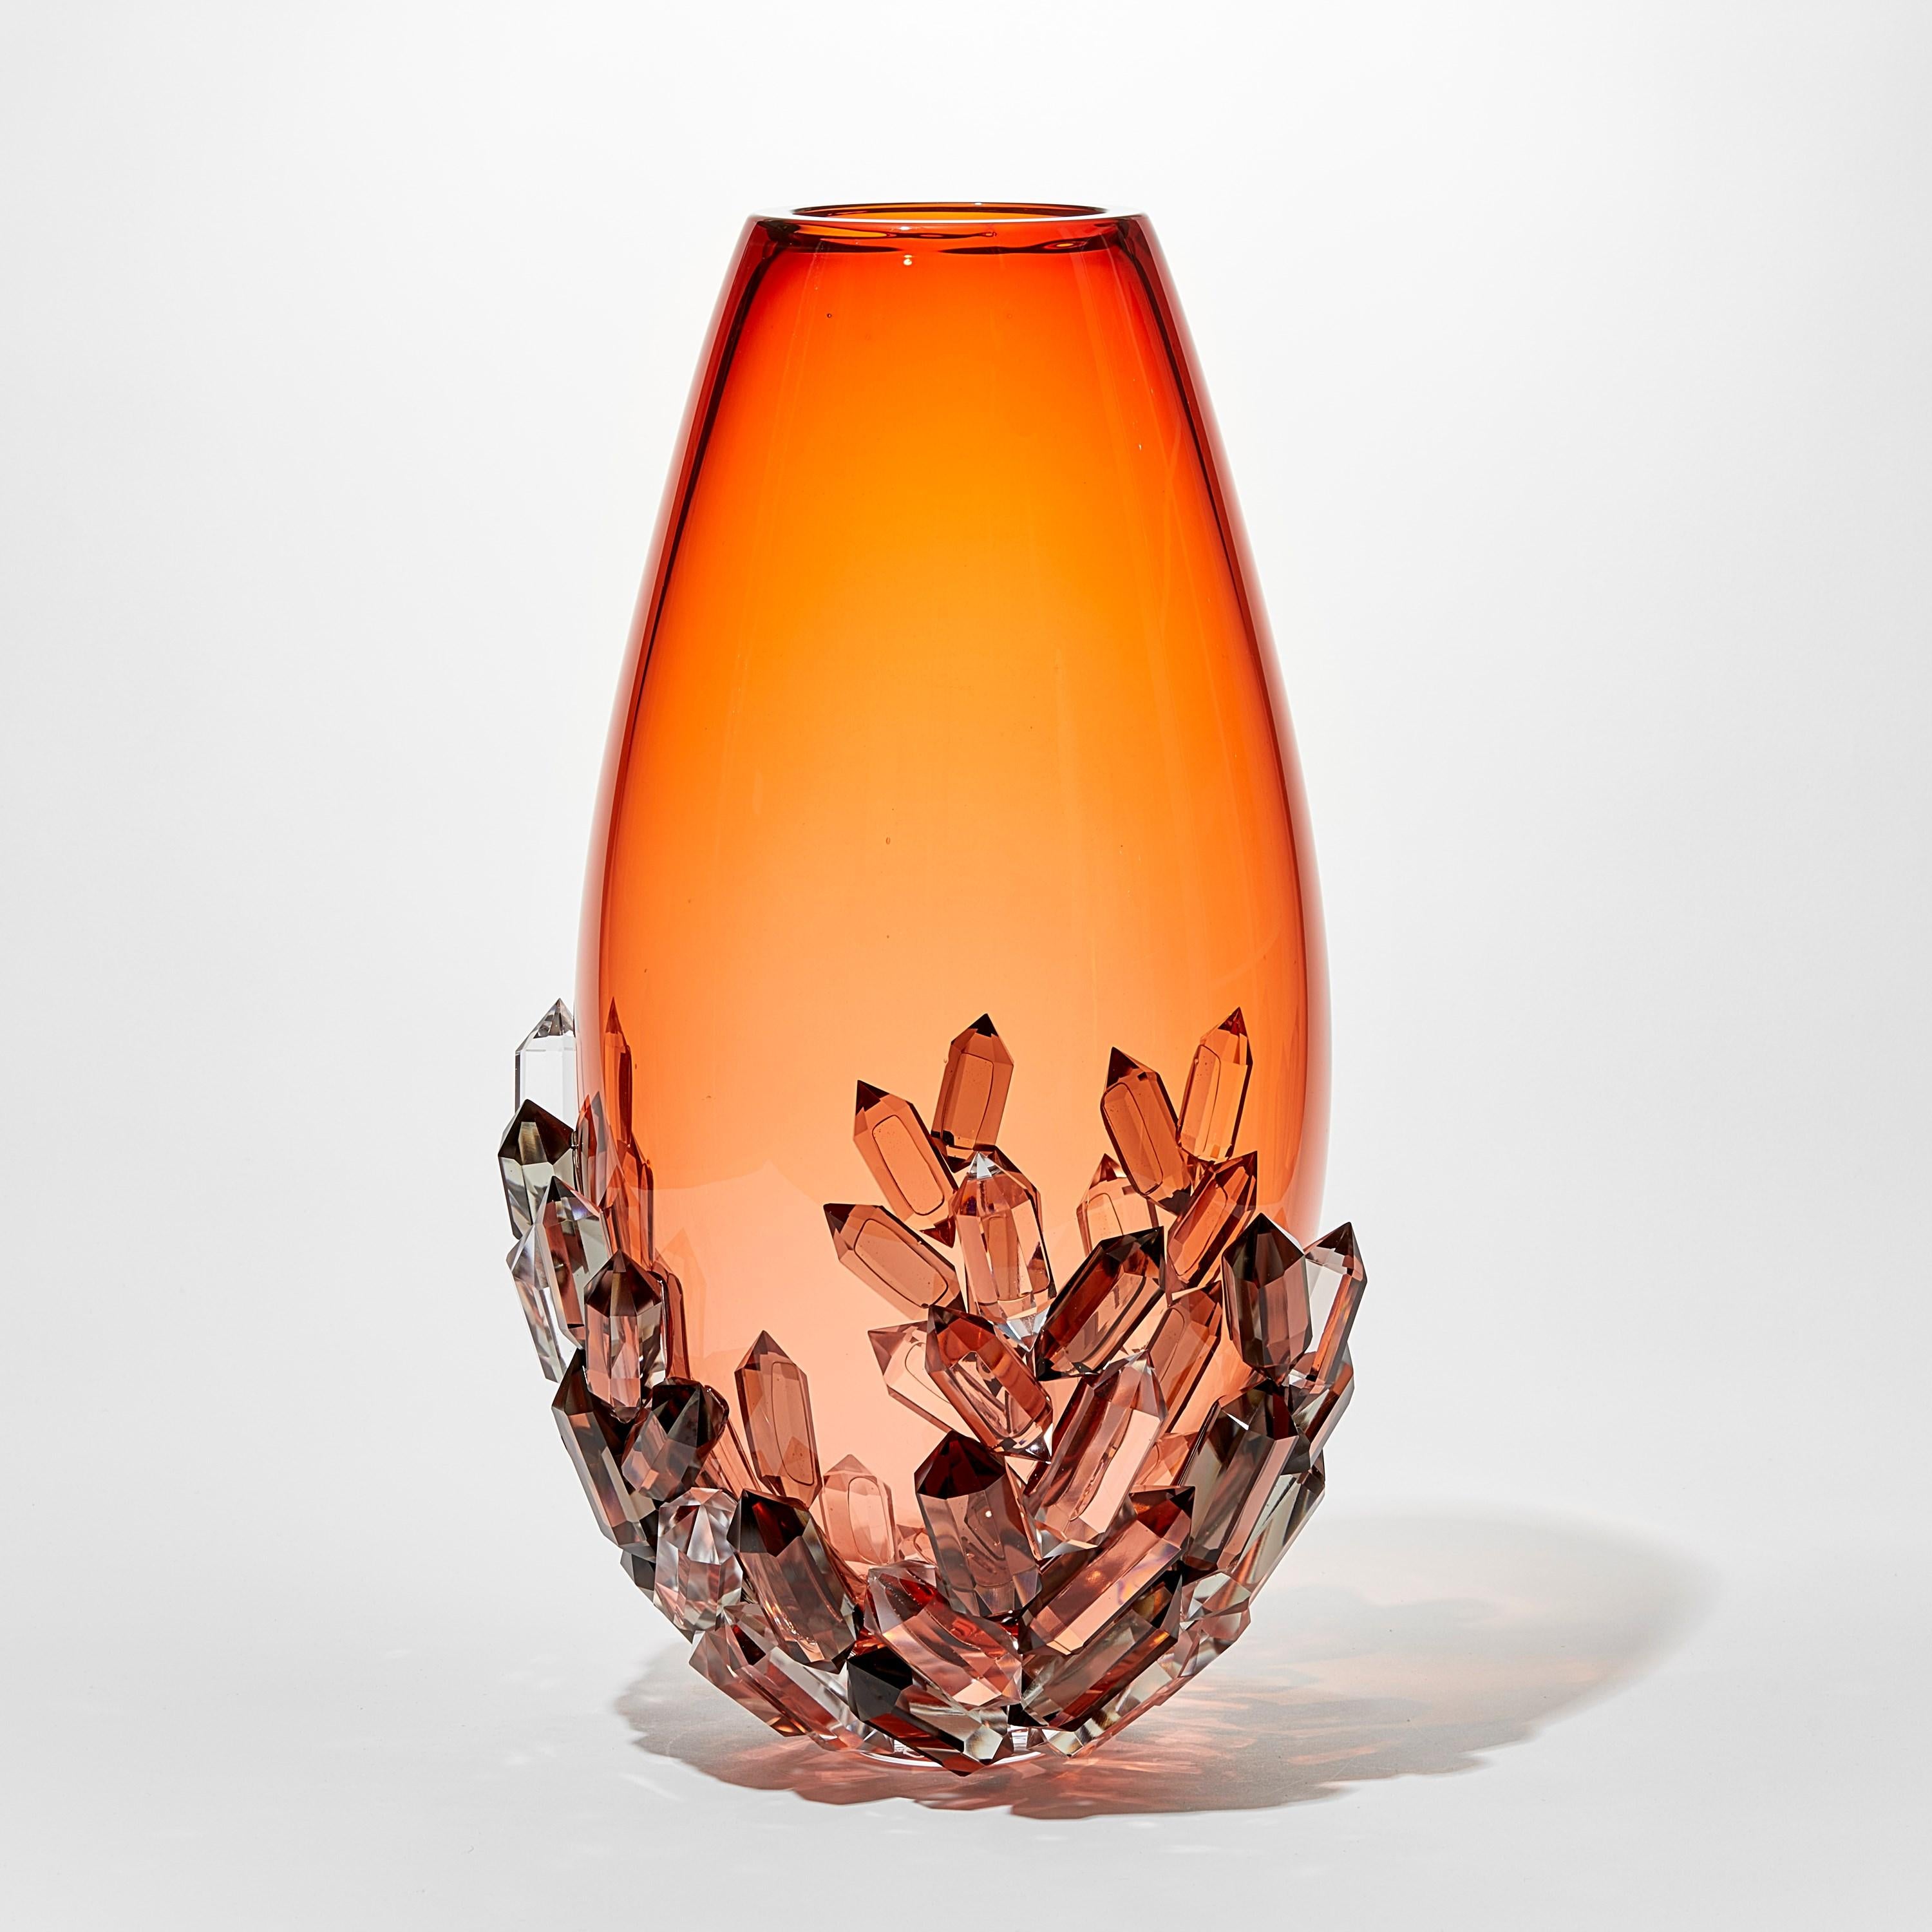 Organic Modern Cristallized Aurora, a peach glass vase with cut crystals by Hanne Enemark For Sale